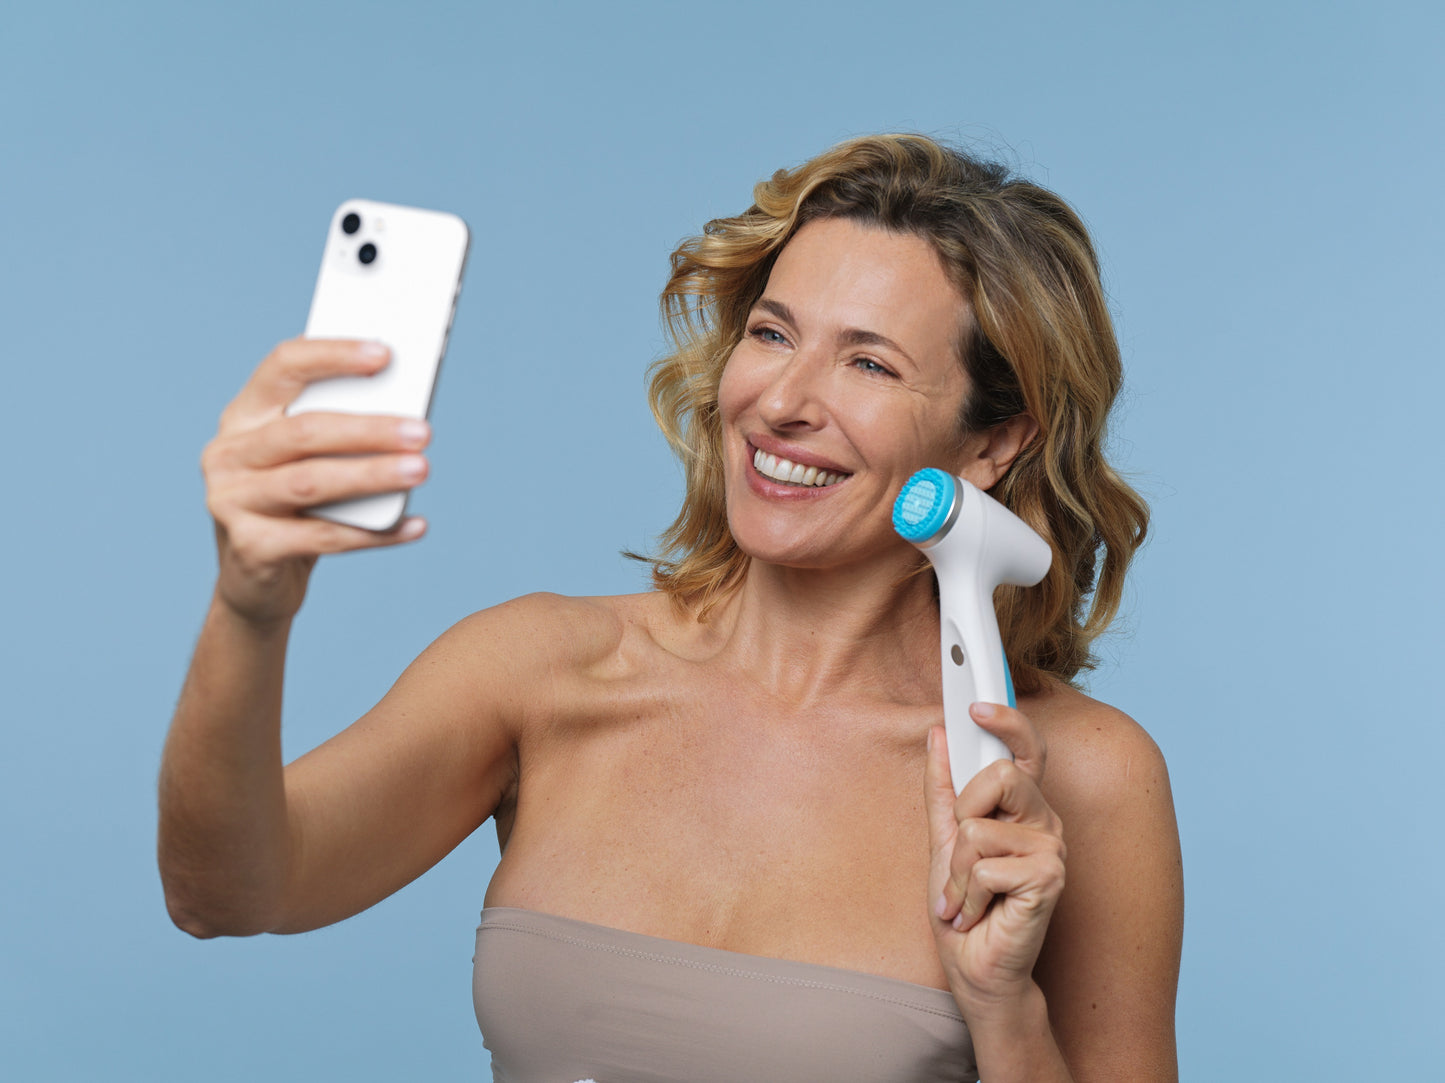 Customer holds LumiSpa iO and cell phone - LumiSpa iO you can communicate via Blutetooth with the Nu Skin Vera app on your cell phone to meet your grooming goals with intelligent IoT-technology (Internet of Things).